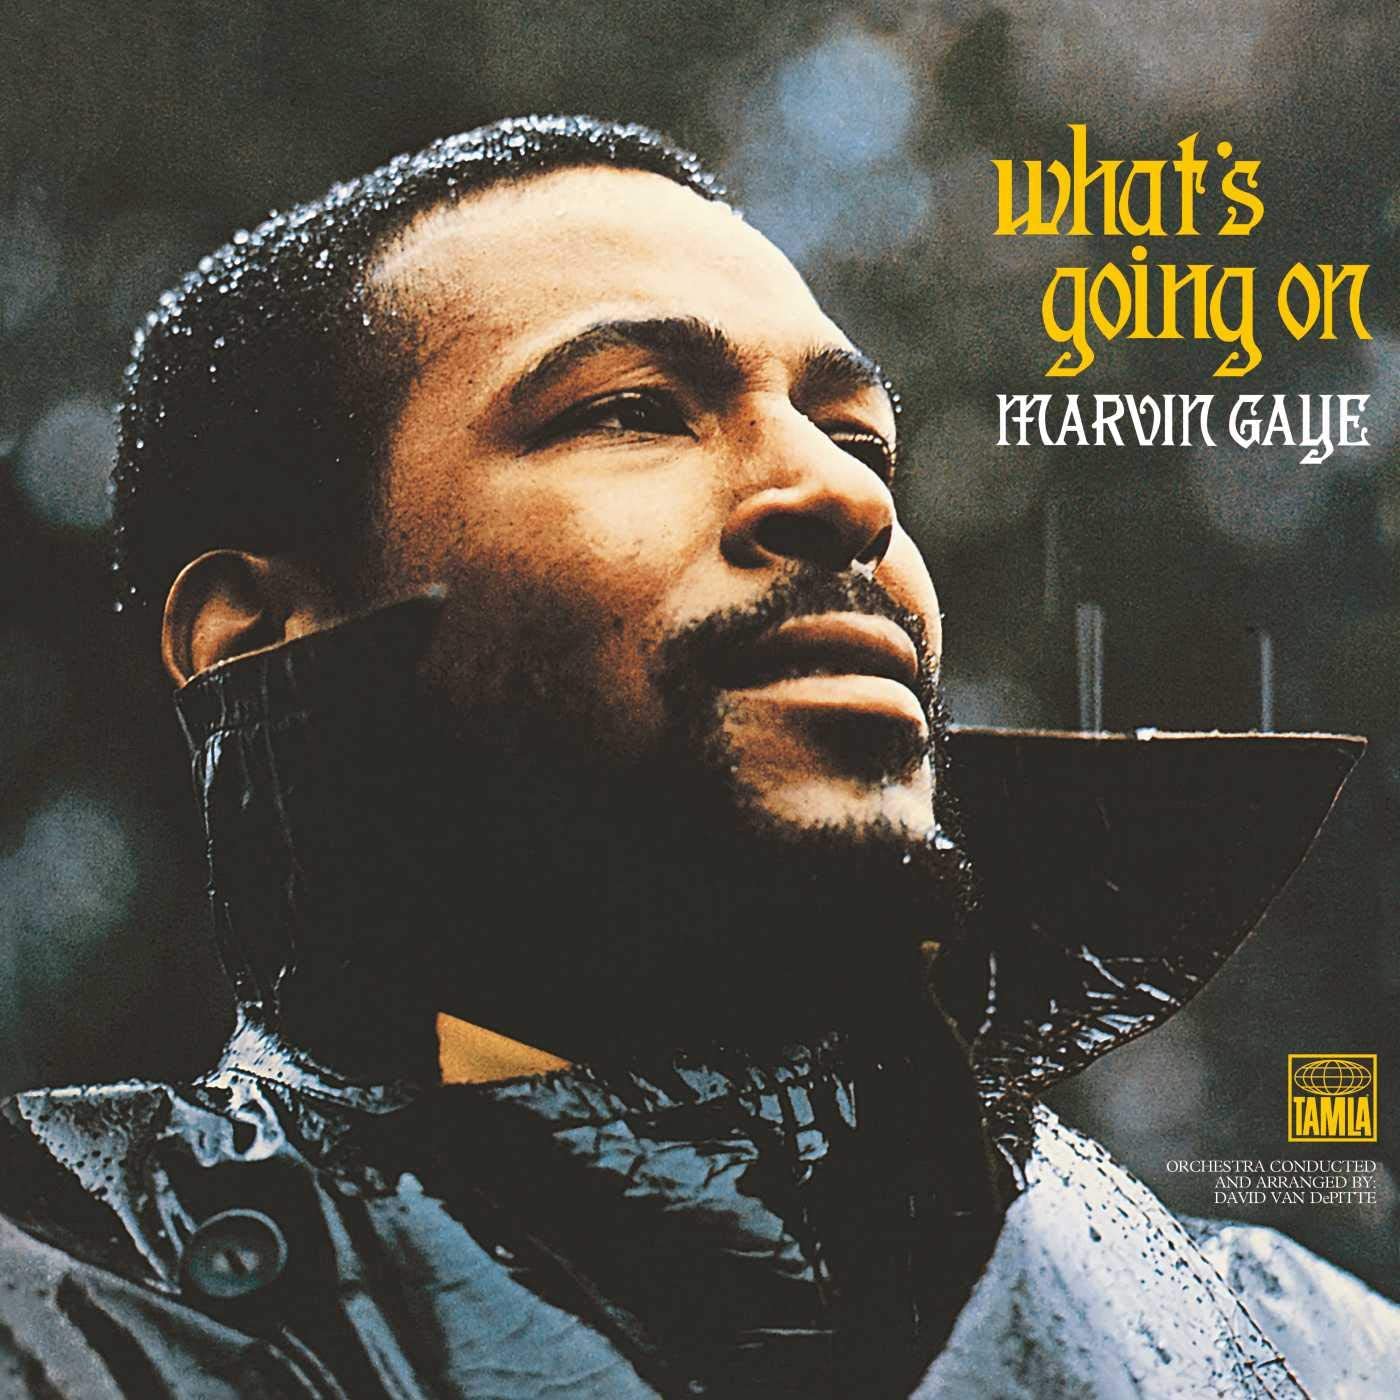 The cover art for ‘What’s Going On’, featuring Gaye as photographed by Jim Hendin